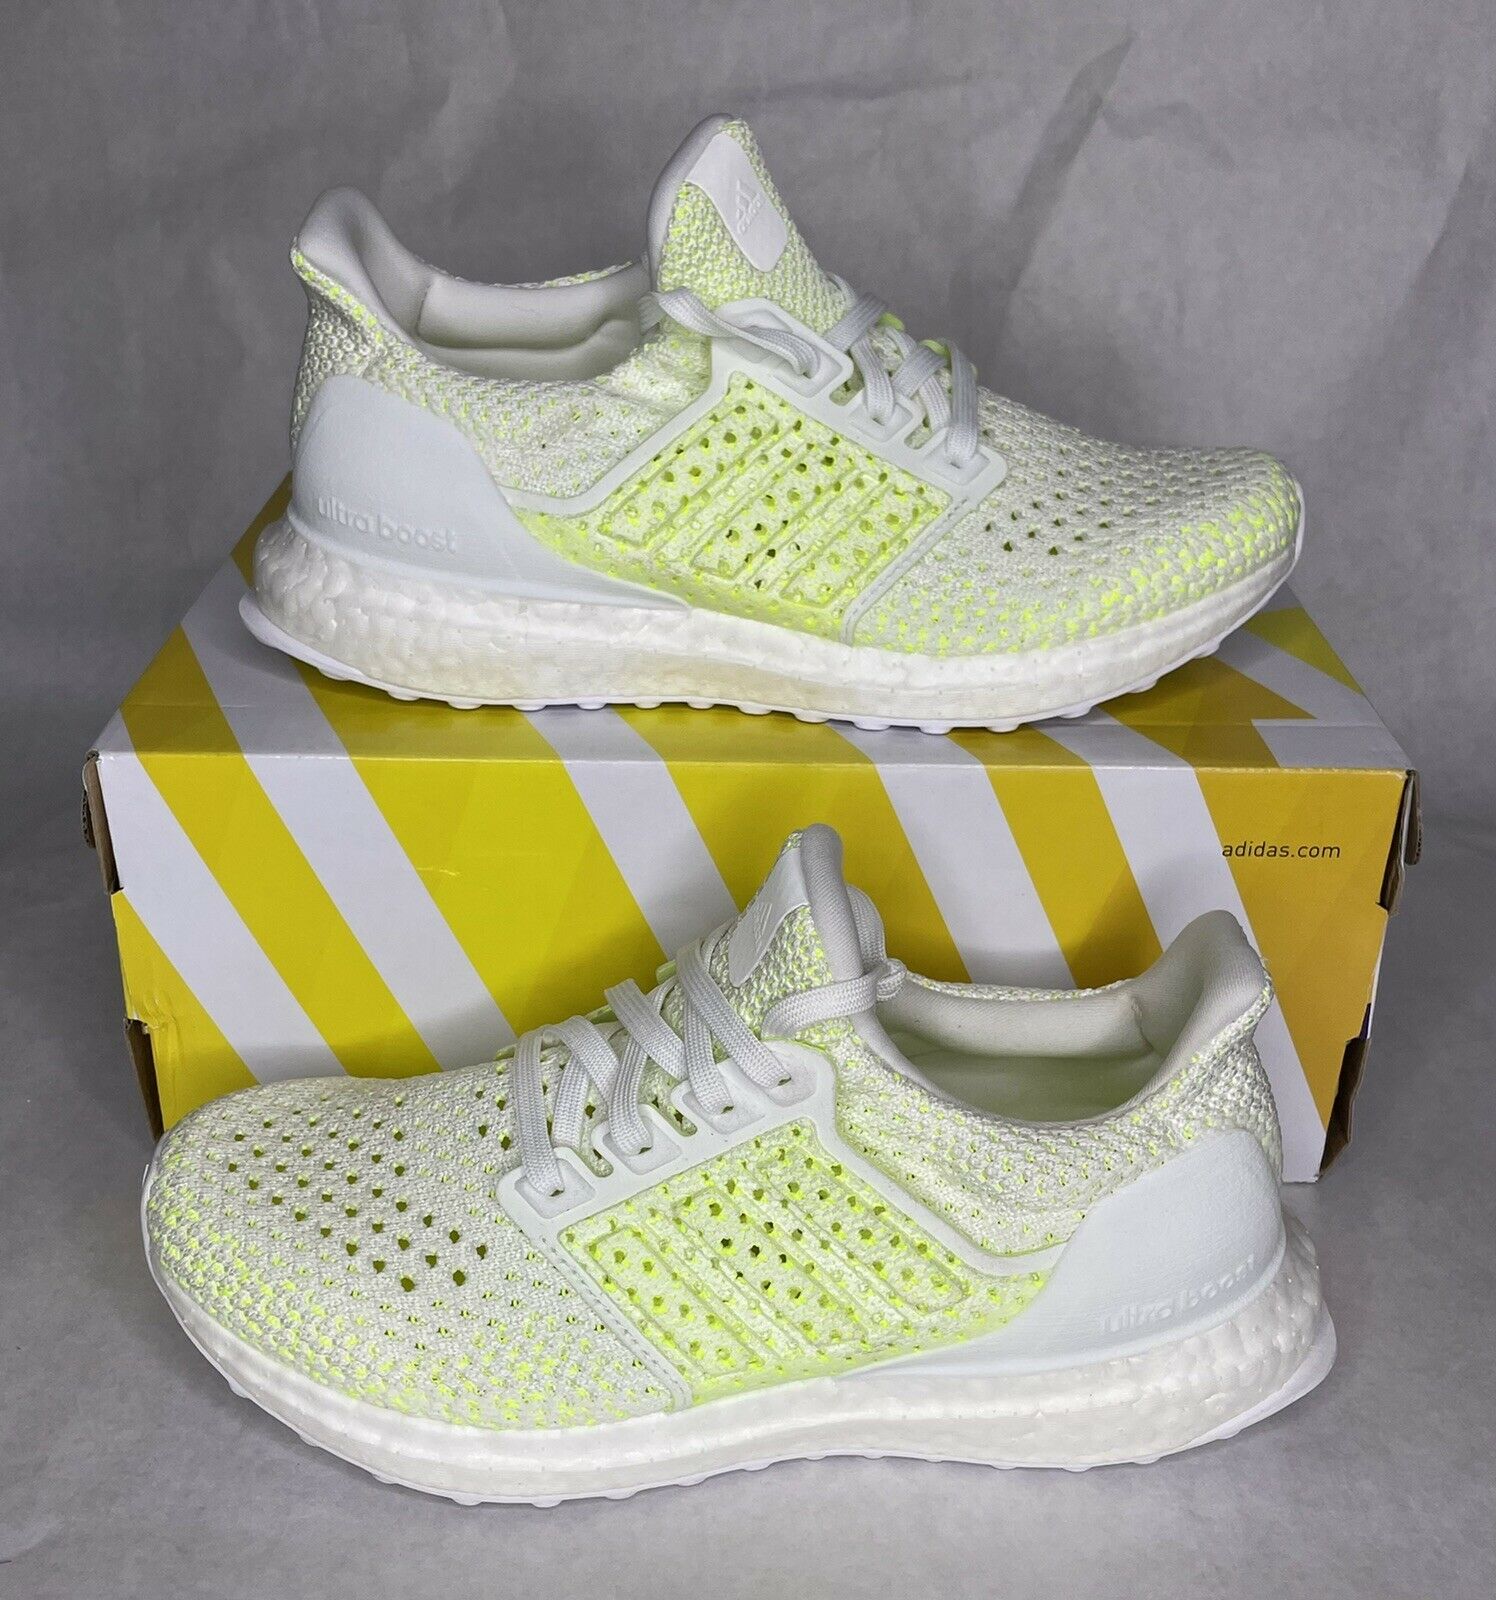 VNDS Adidas Ultraboost Clima J Running Shoes Youth Size 5.5 Wmns Size 7 (B43506)